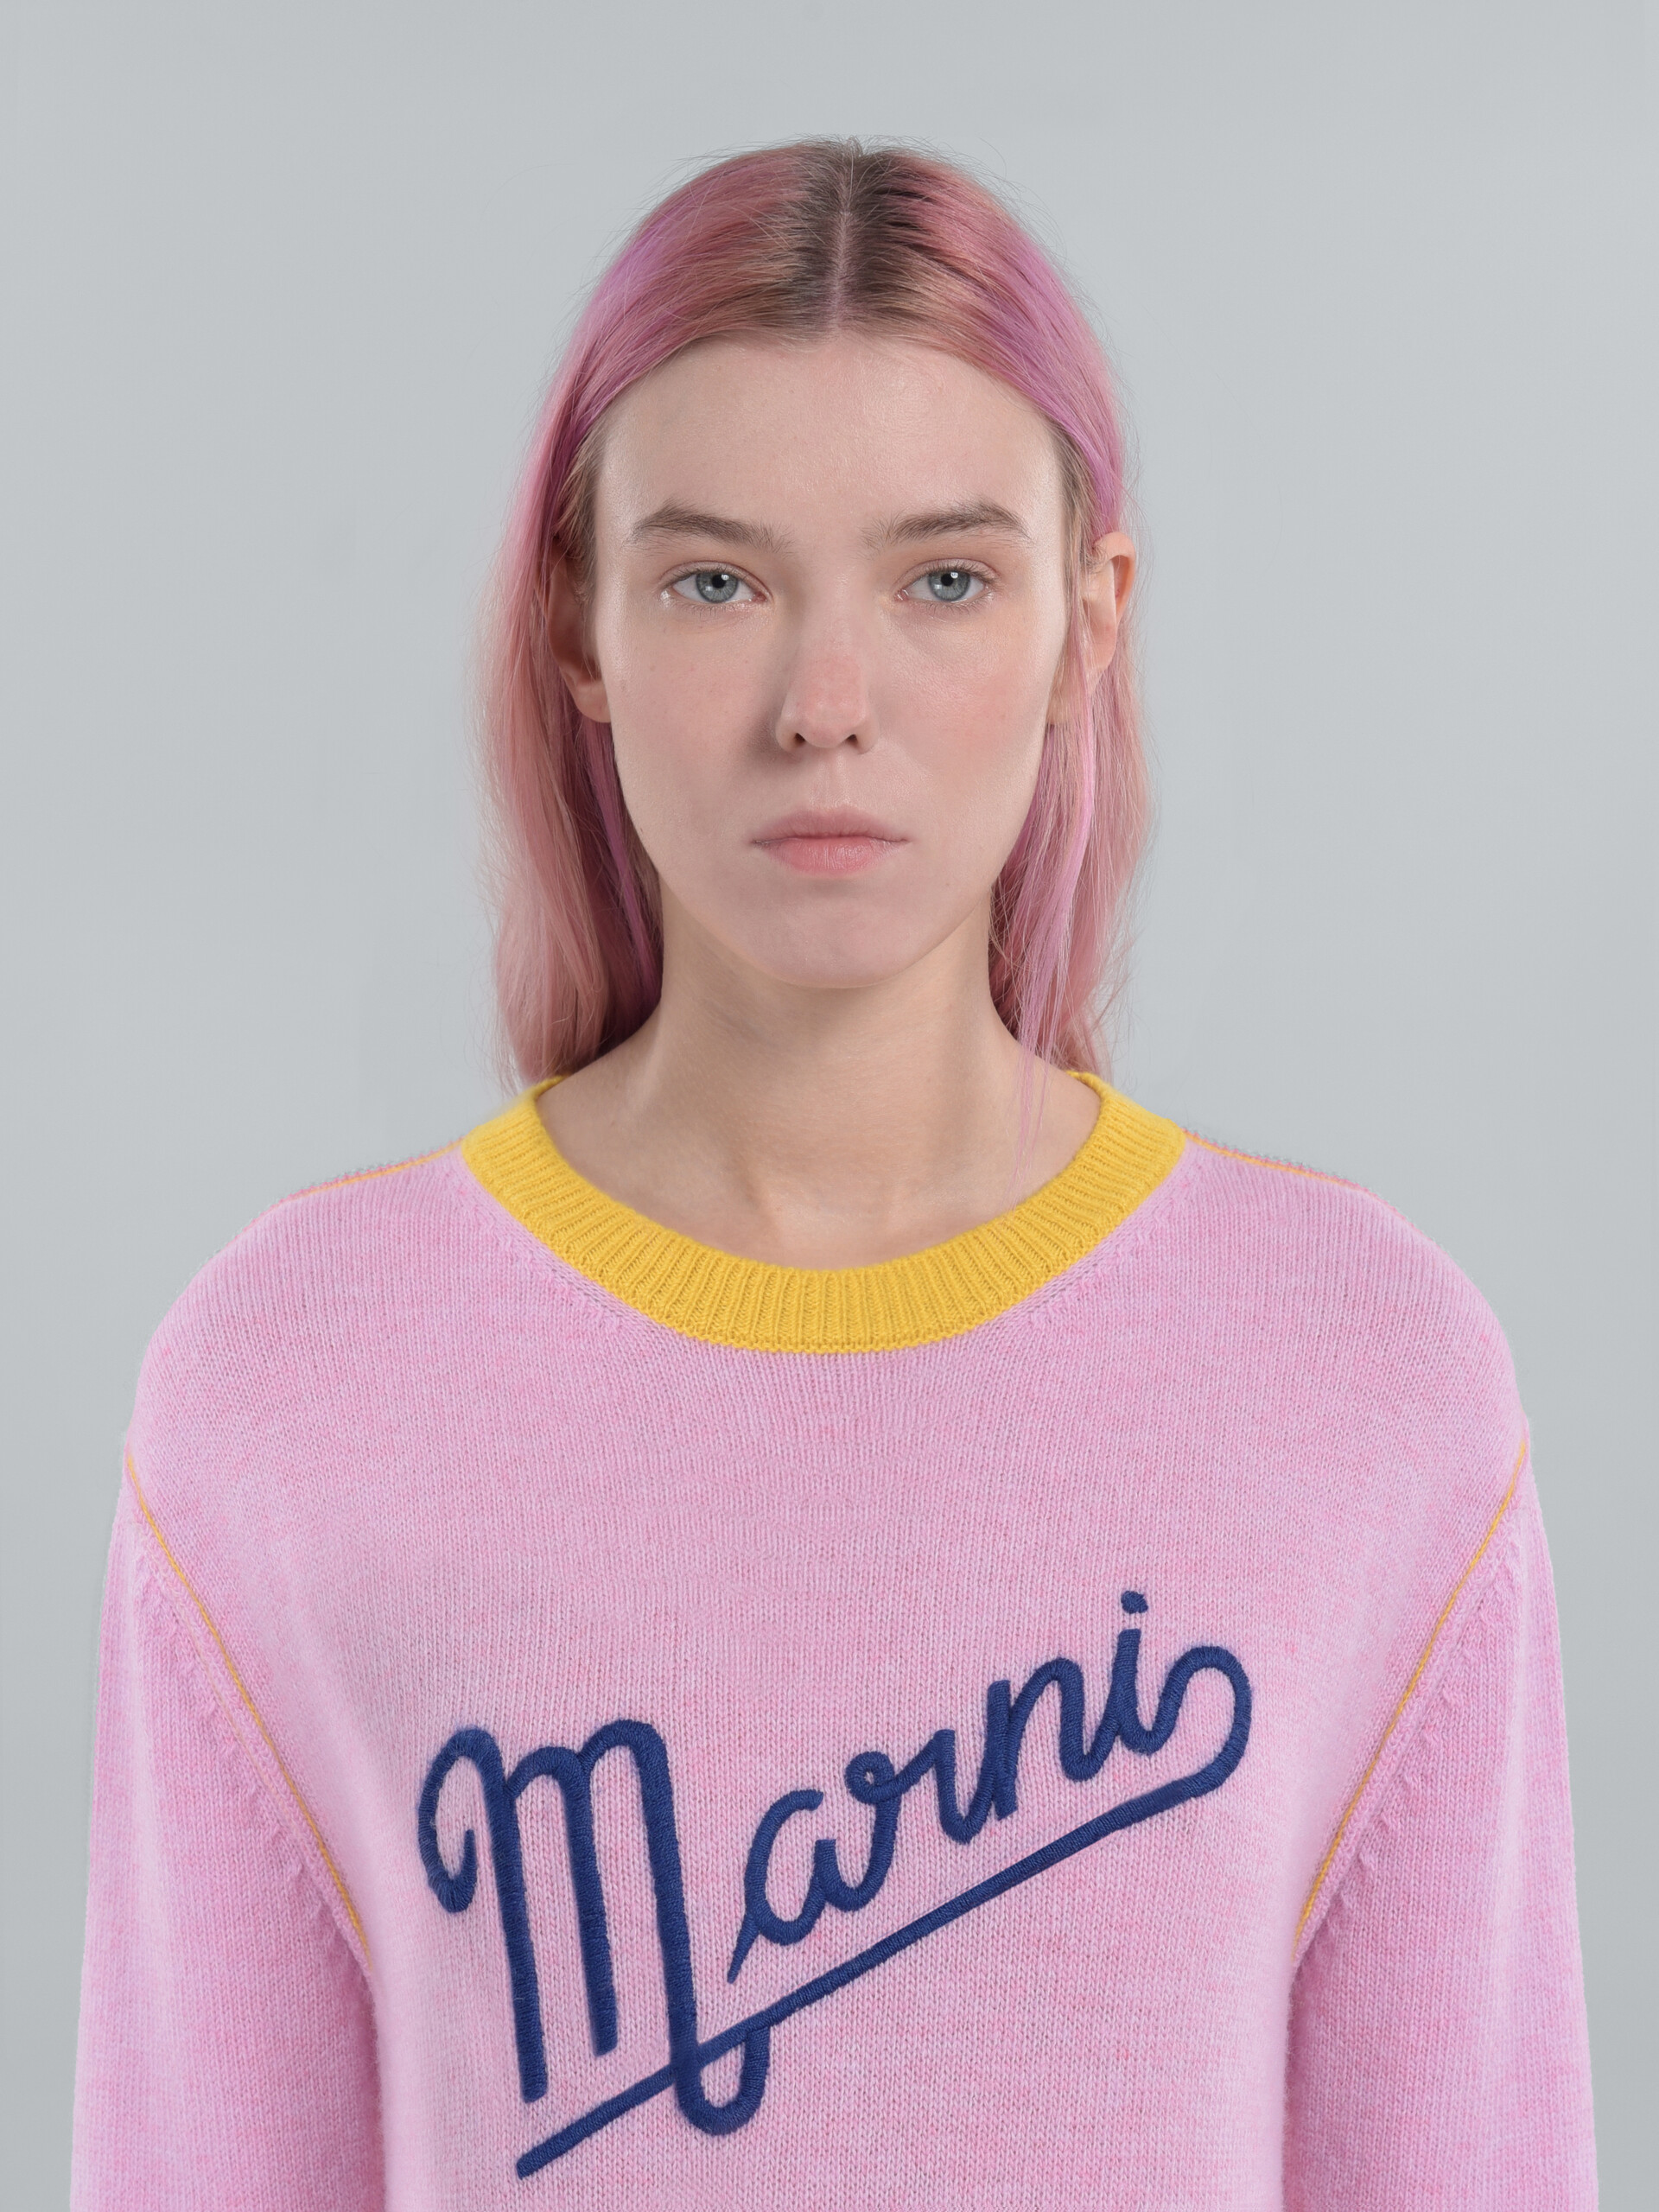 Pink wool sweater with logo - Pullovers - Image 4